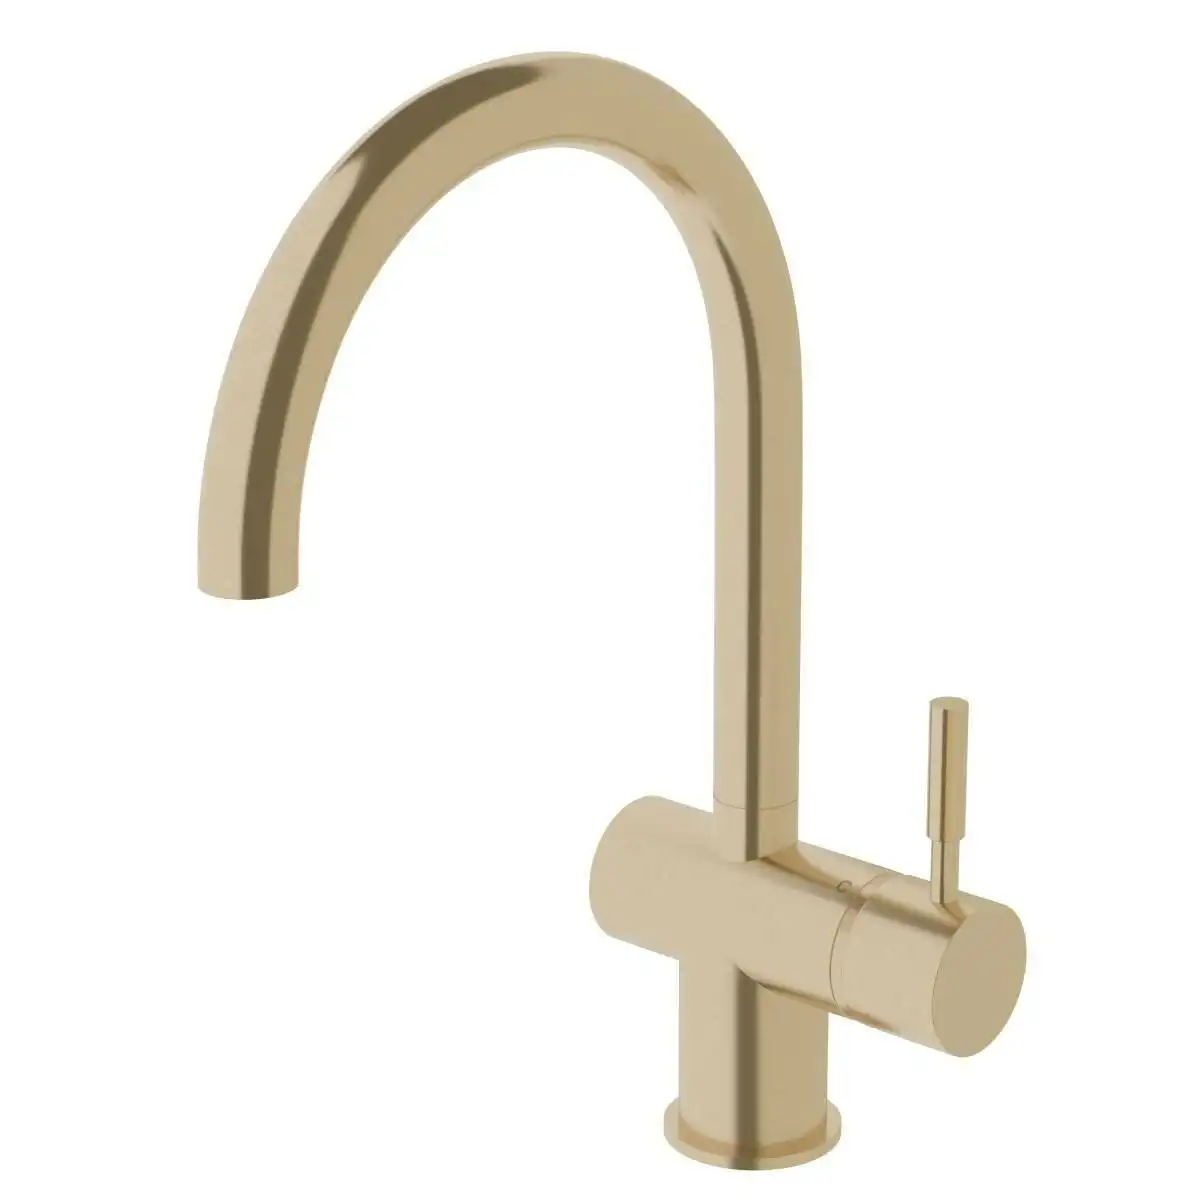 Sussex Taps Voda Sink Mixer Curved Brushed Brass Gold